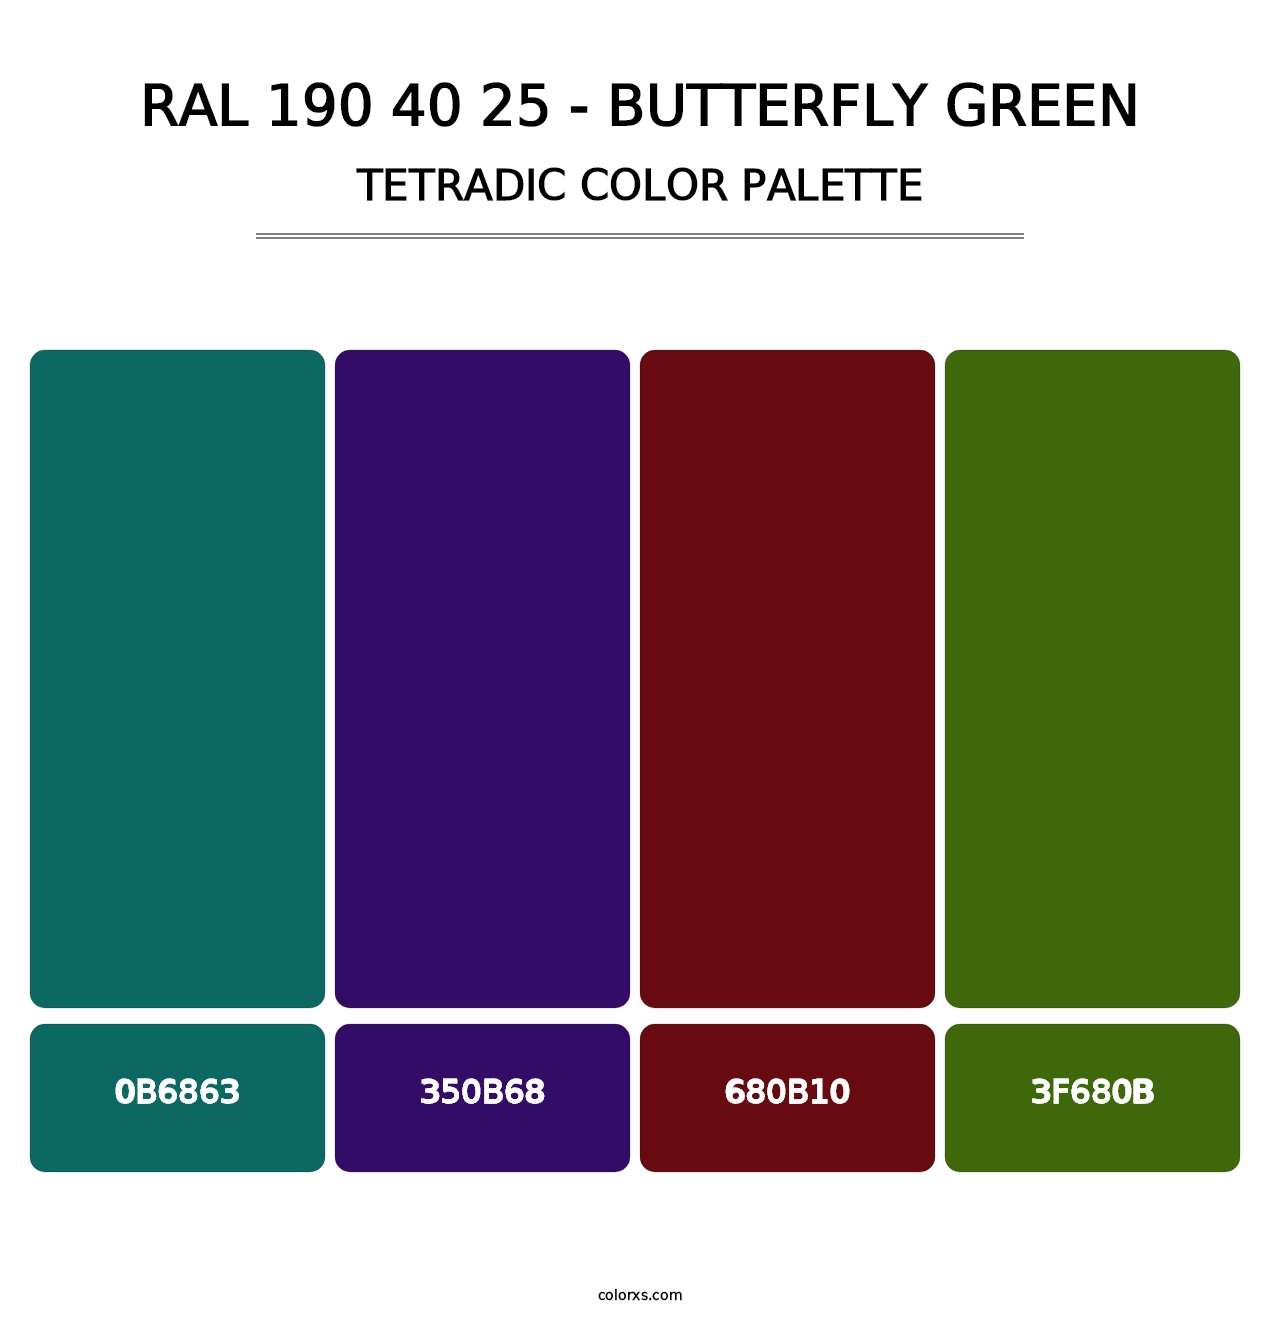 RAL 190 40 25 - Butterfly Green - Tetradic Color Palette